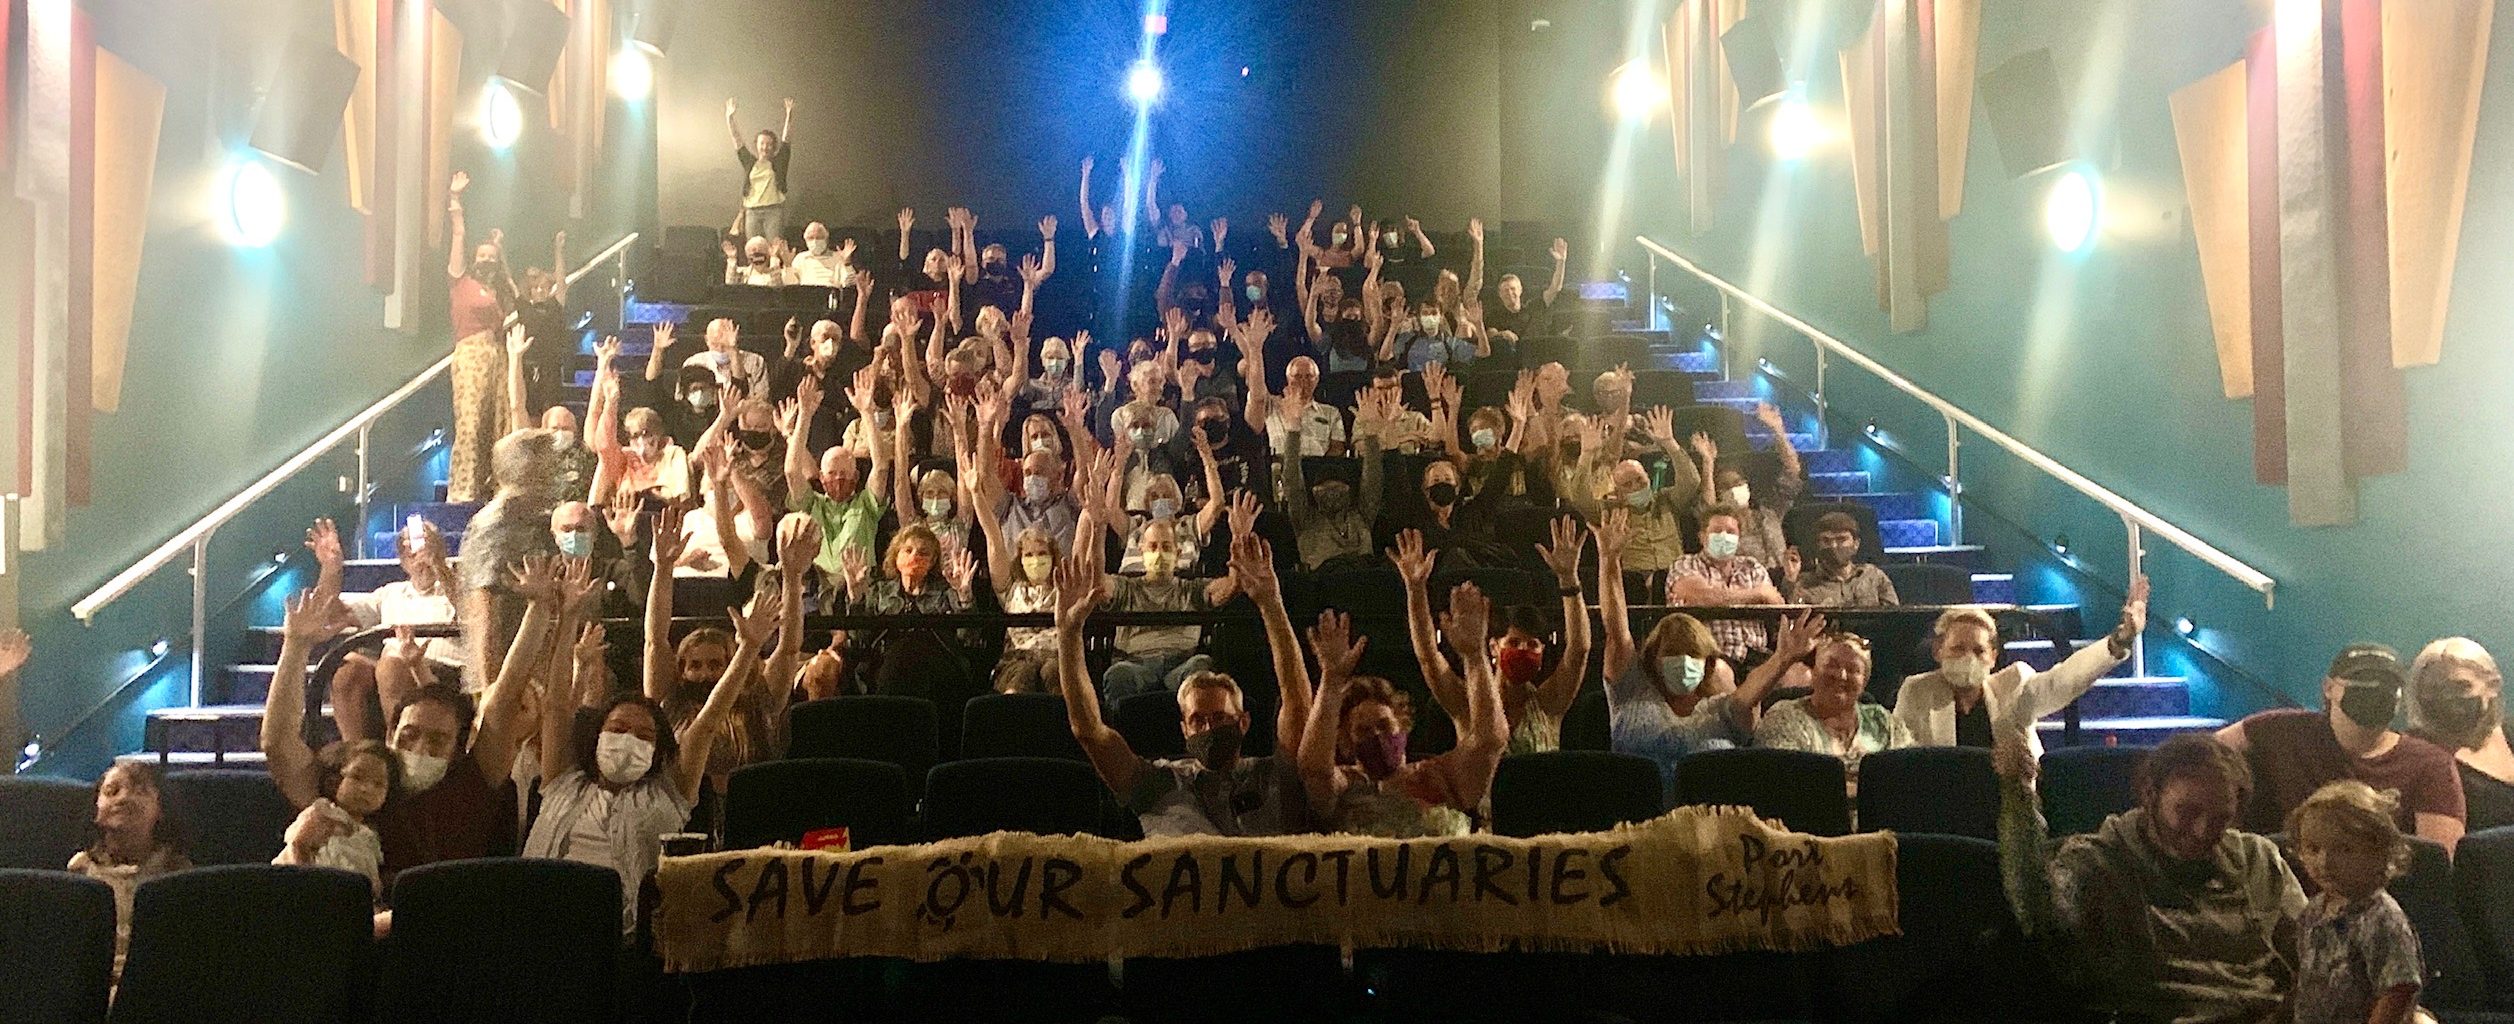 Nelson Bay Cinema goers with save our sanctuaries sign